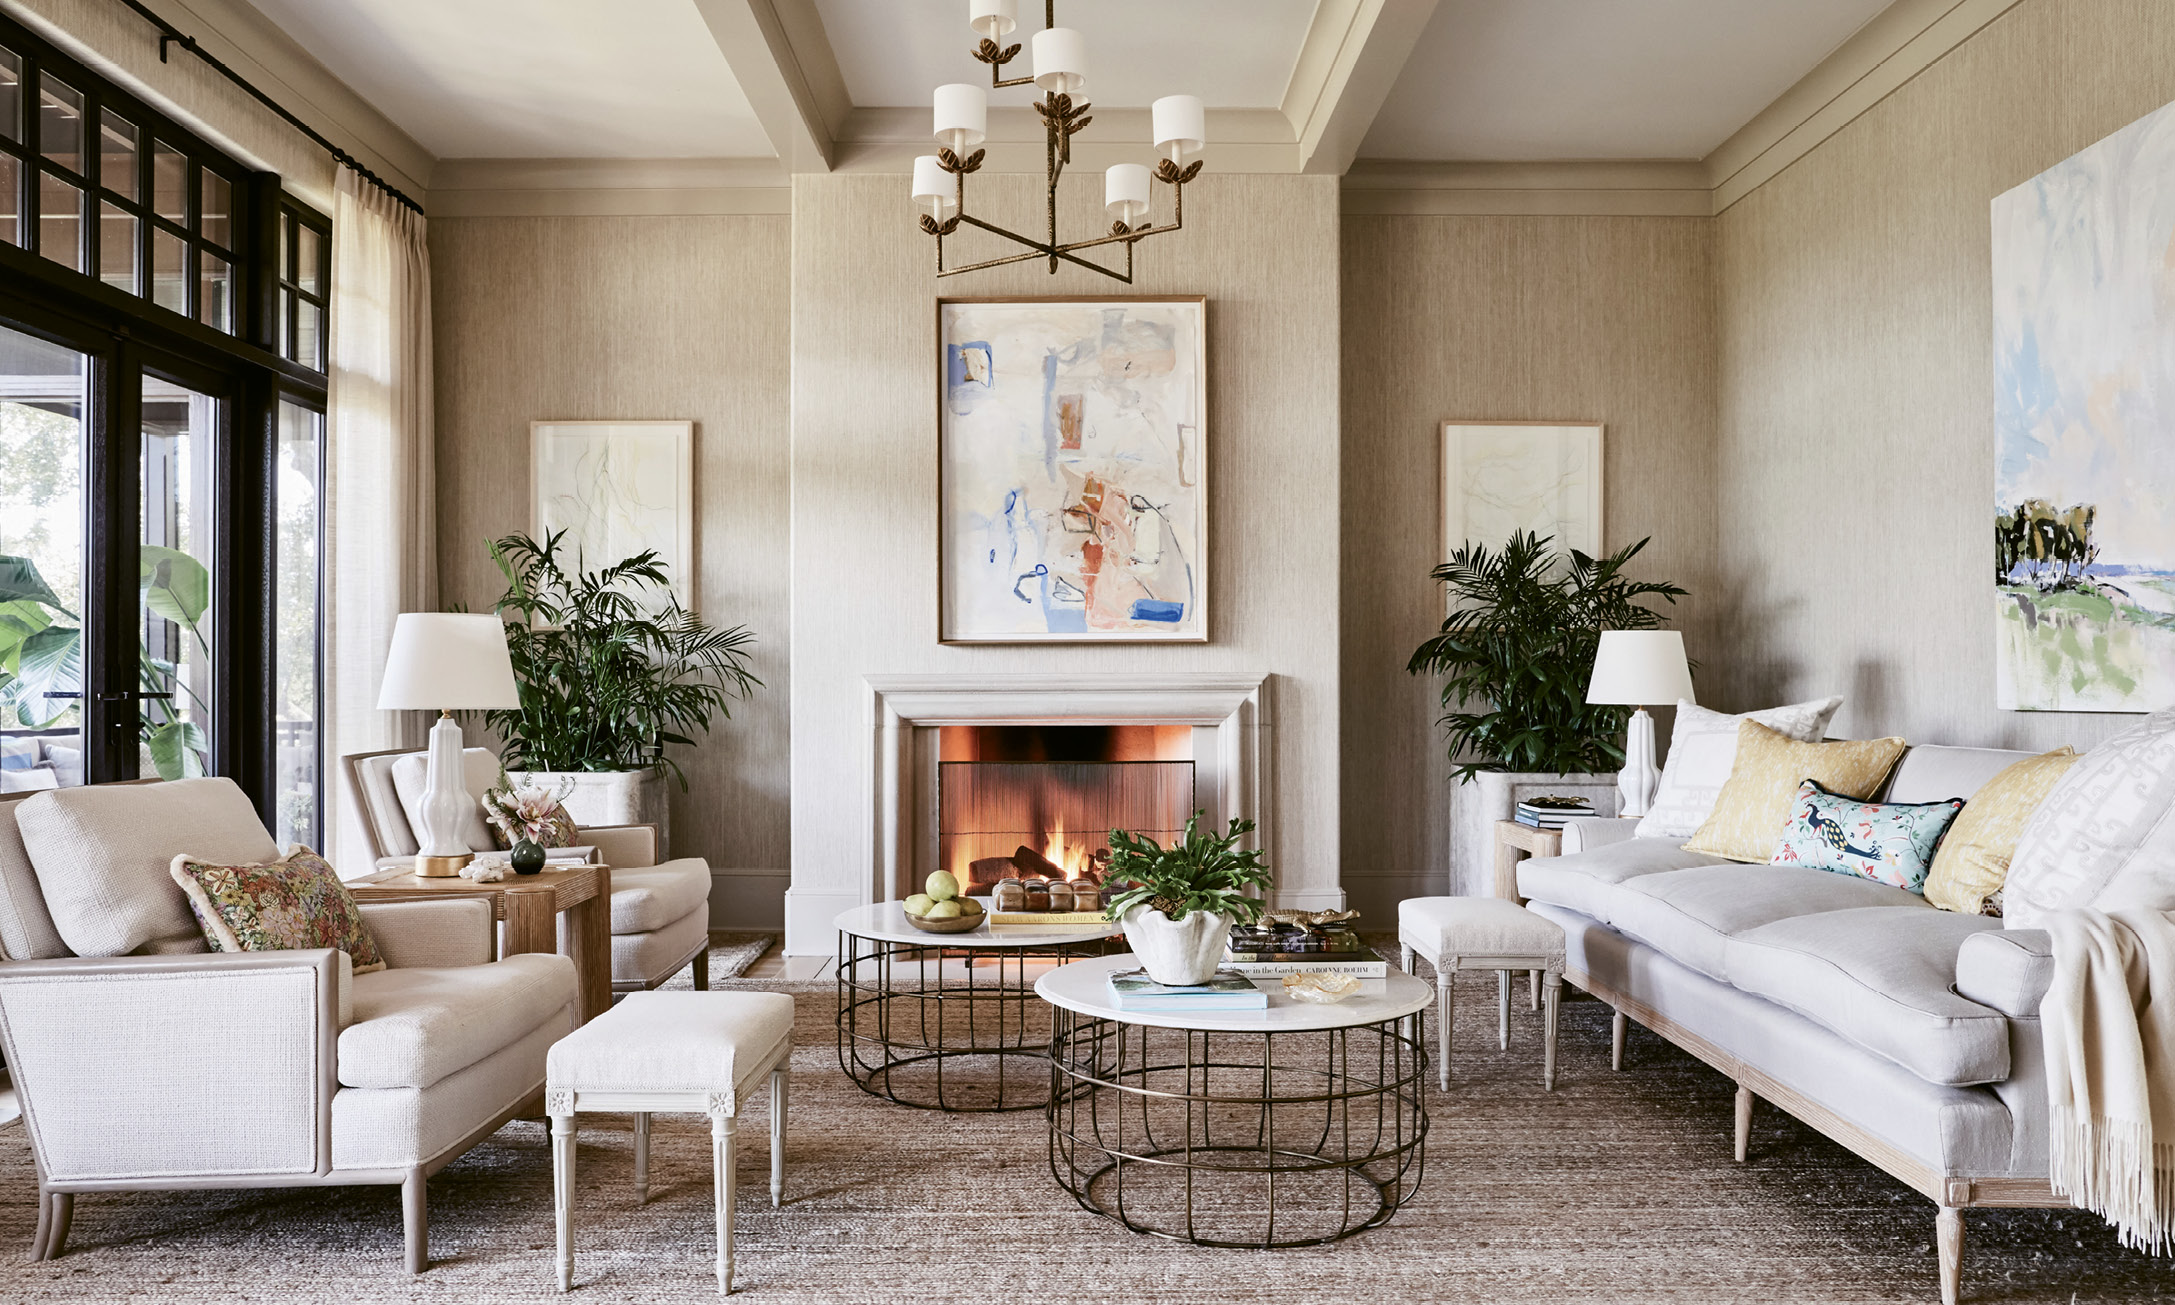 Neutral Territory: In the living room, a neutral yet textured sandy palette, including grasscloth-covered walls and upholstered linen sofa and chairs, allows the expansive marsh view to take center stage. The Frank Phillips painting over the mantel, found at George Gallery, as well as some commissioned works, provide splashes of subtle color. Bamboo and brass accents add dimension.